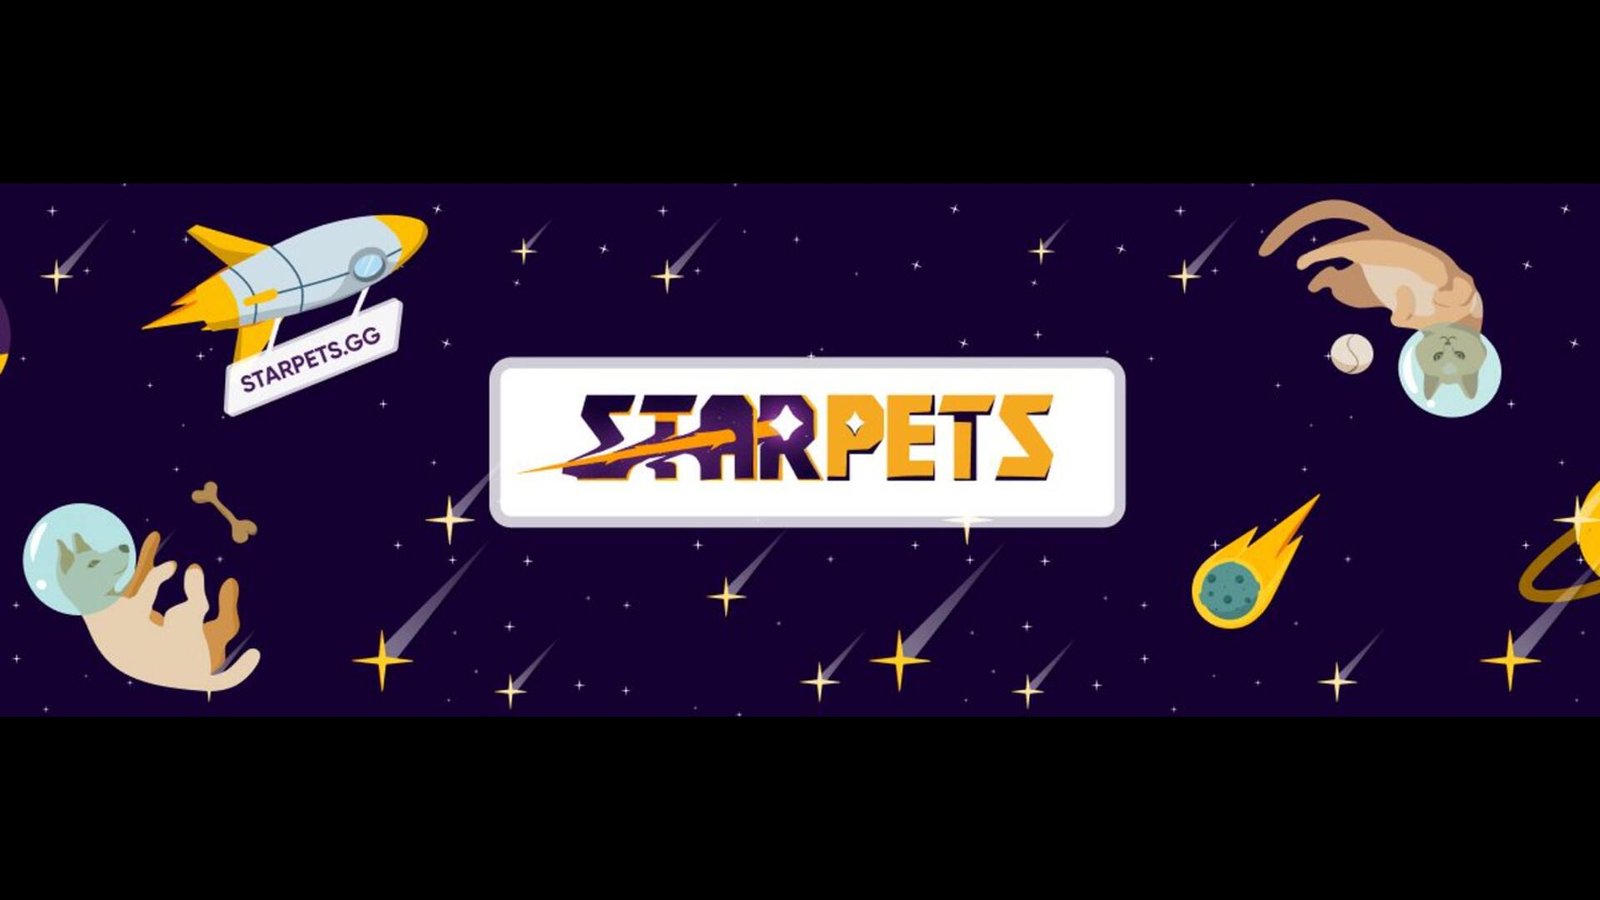 How to buy pets on StarPets.GG (By PC) 